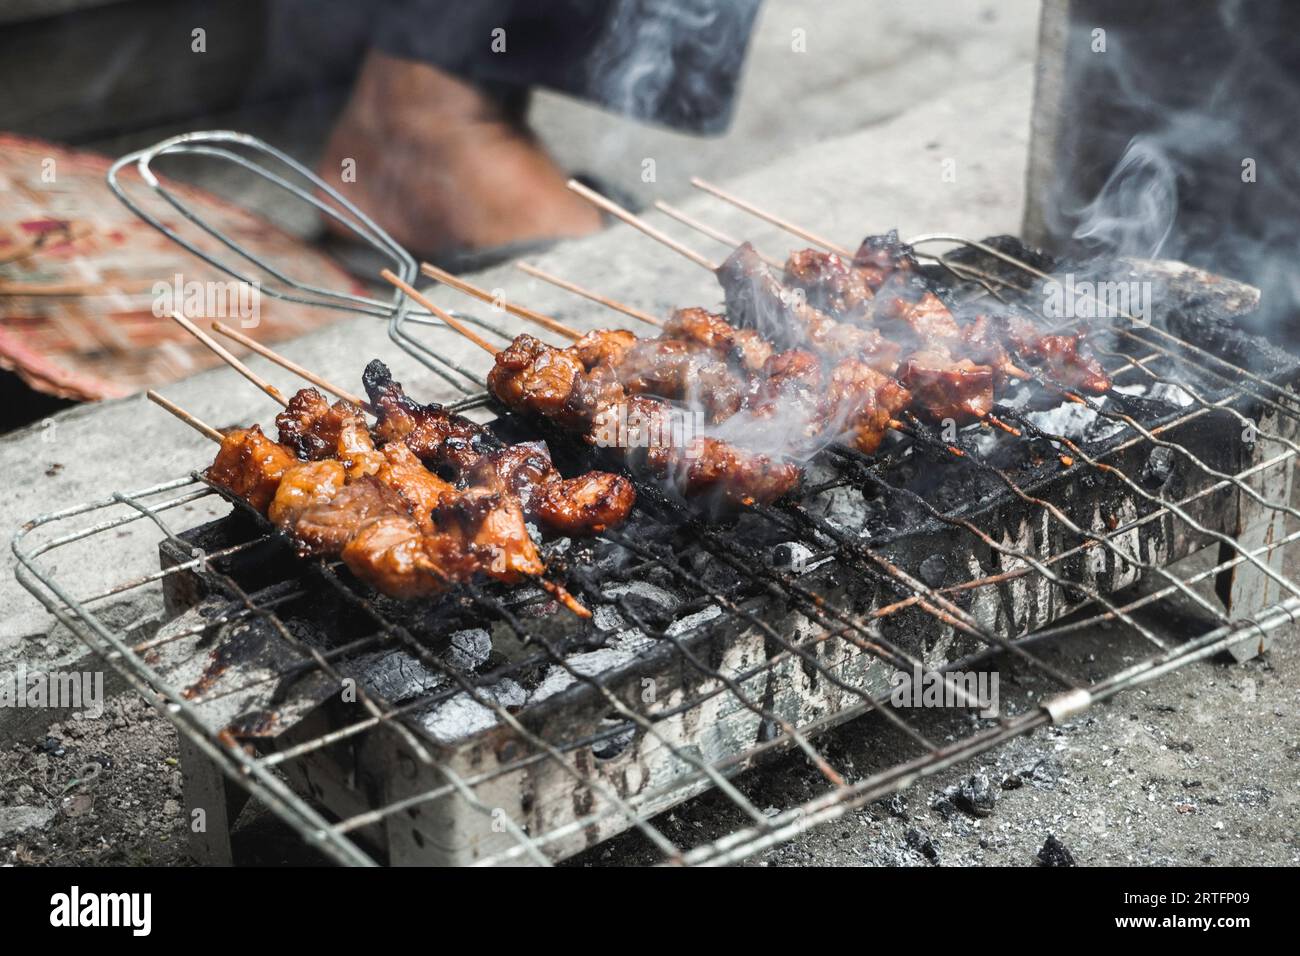 Top view of Sate or satay, traditional food from Indonesia is being grilled on fiery charcoal. Stock Photo